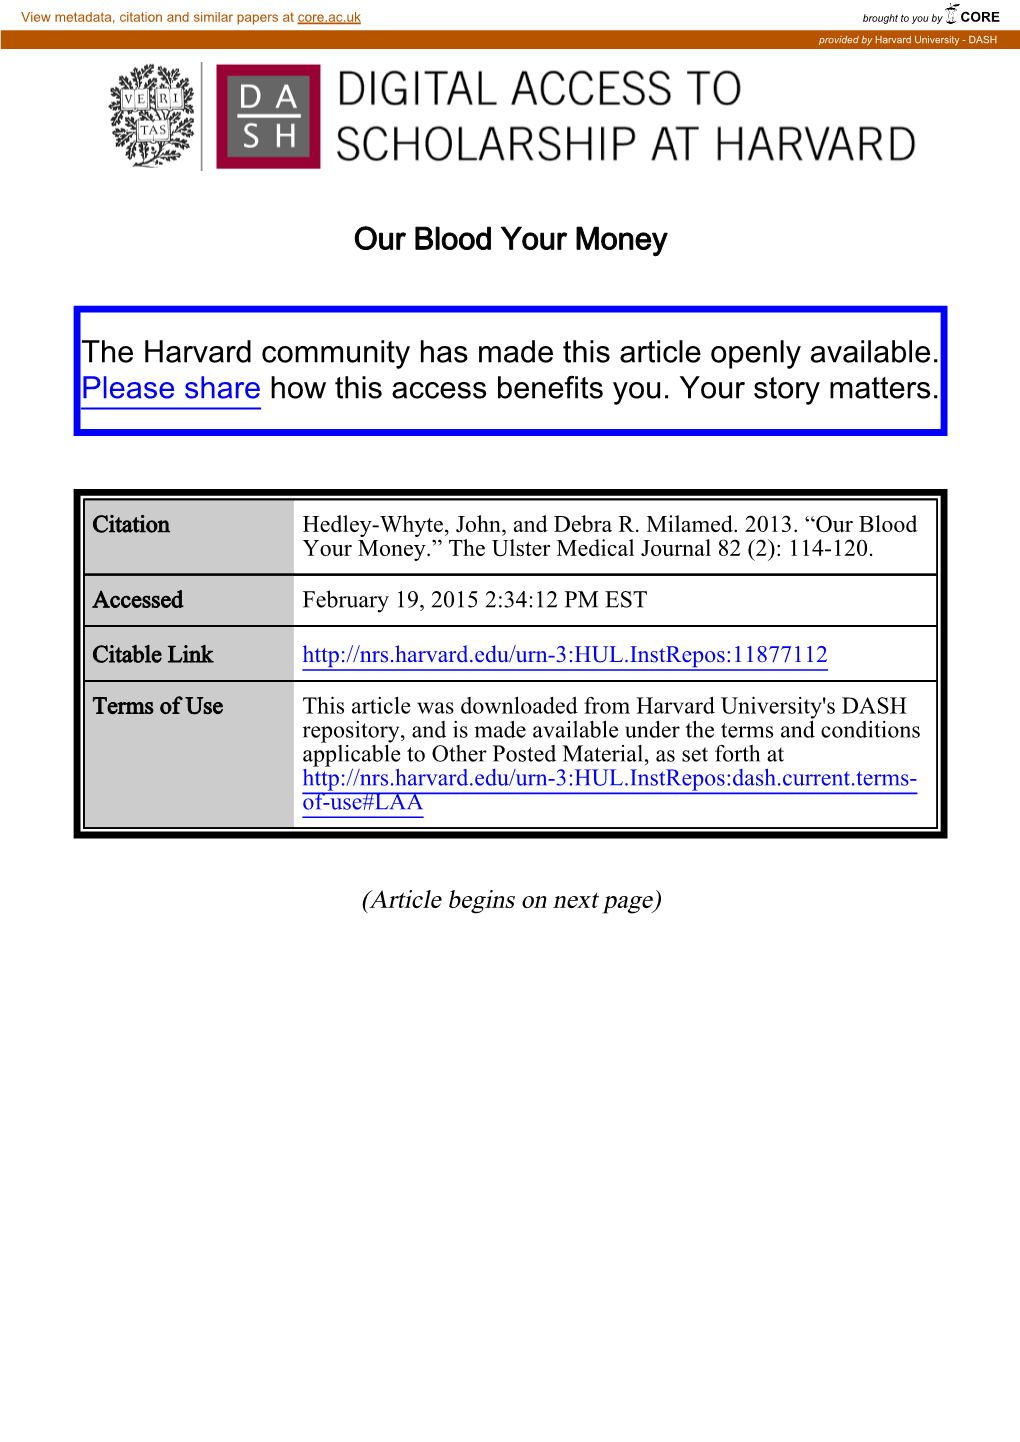 Our Blood Your Money the Harvard Community Has Made This Article